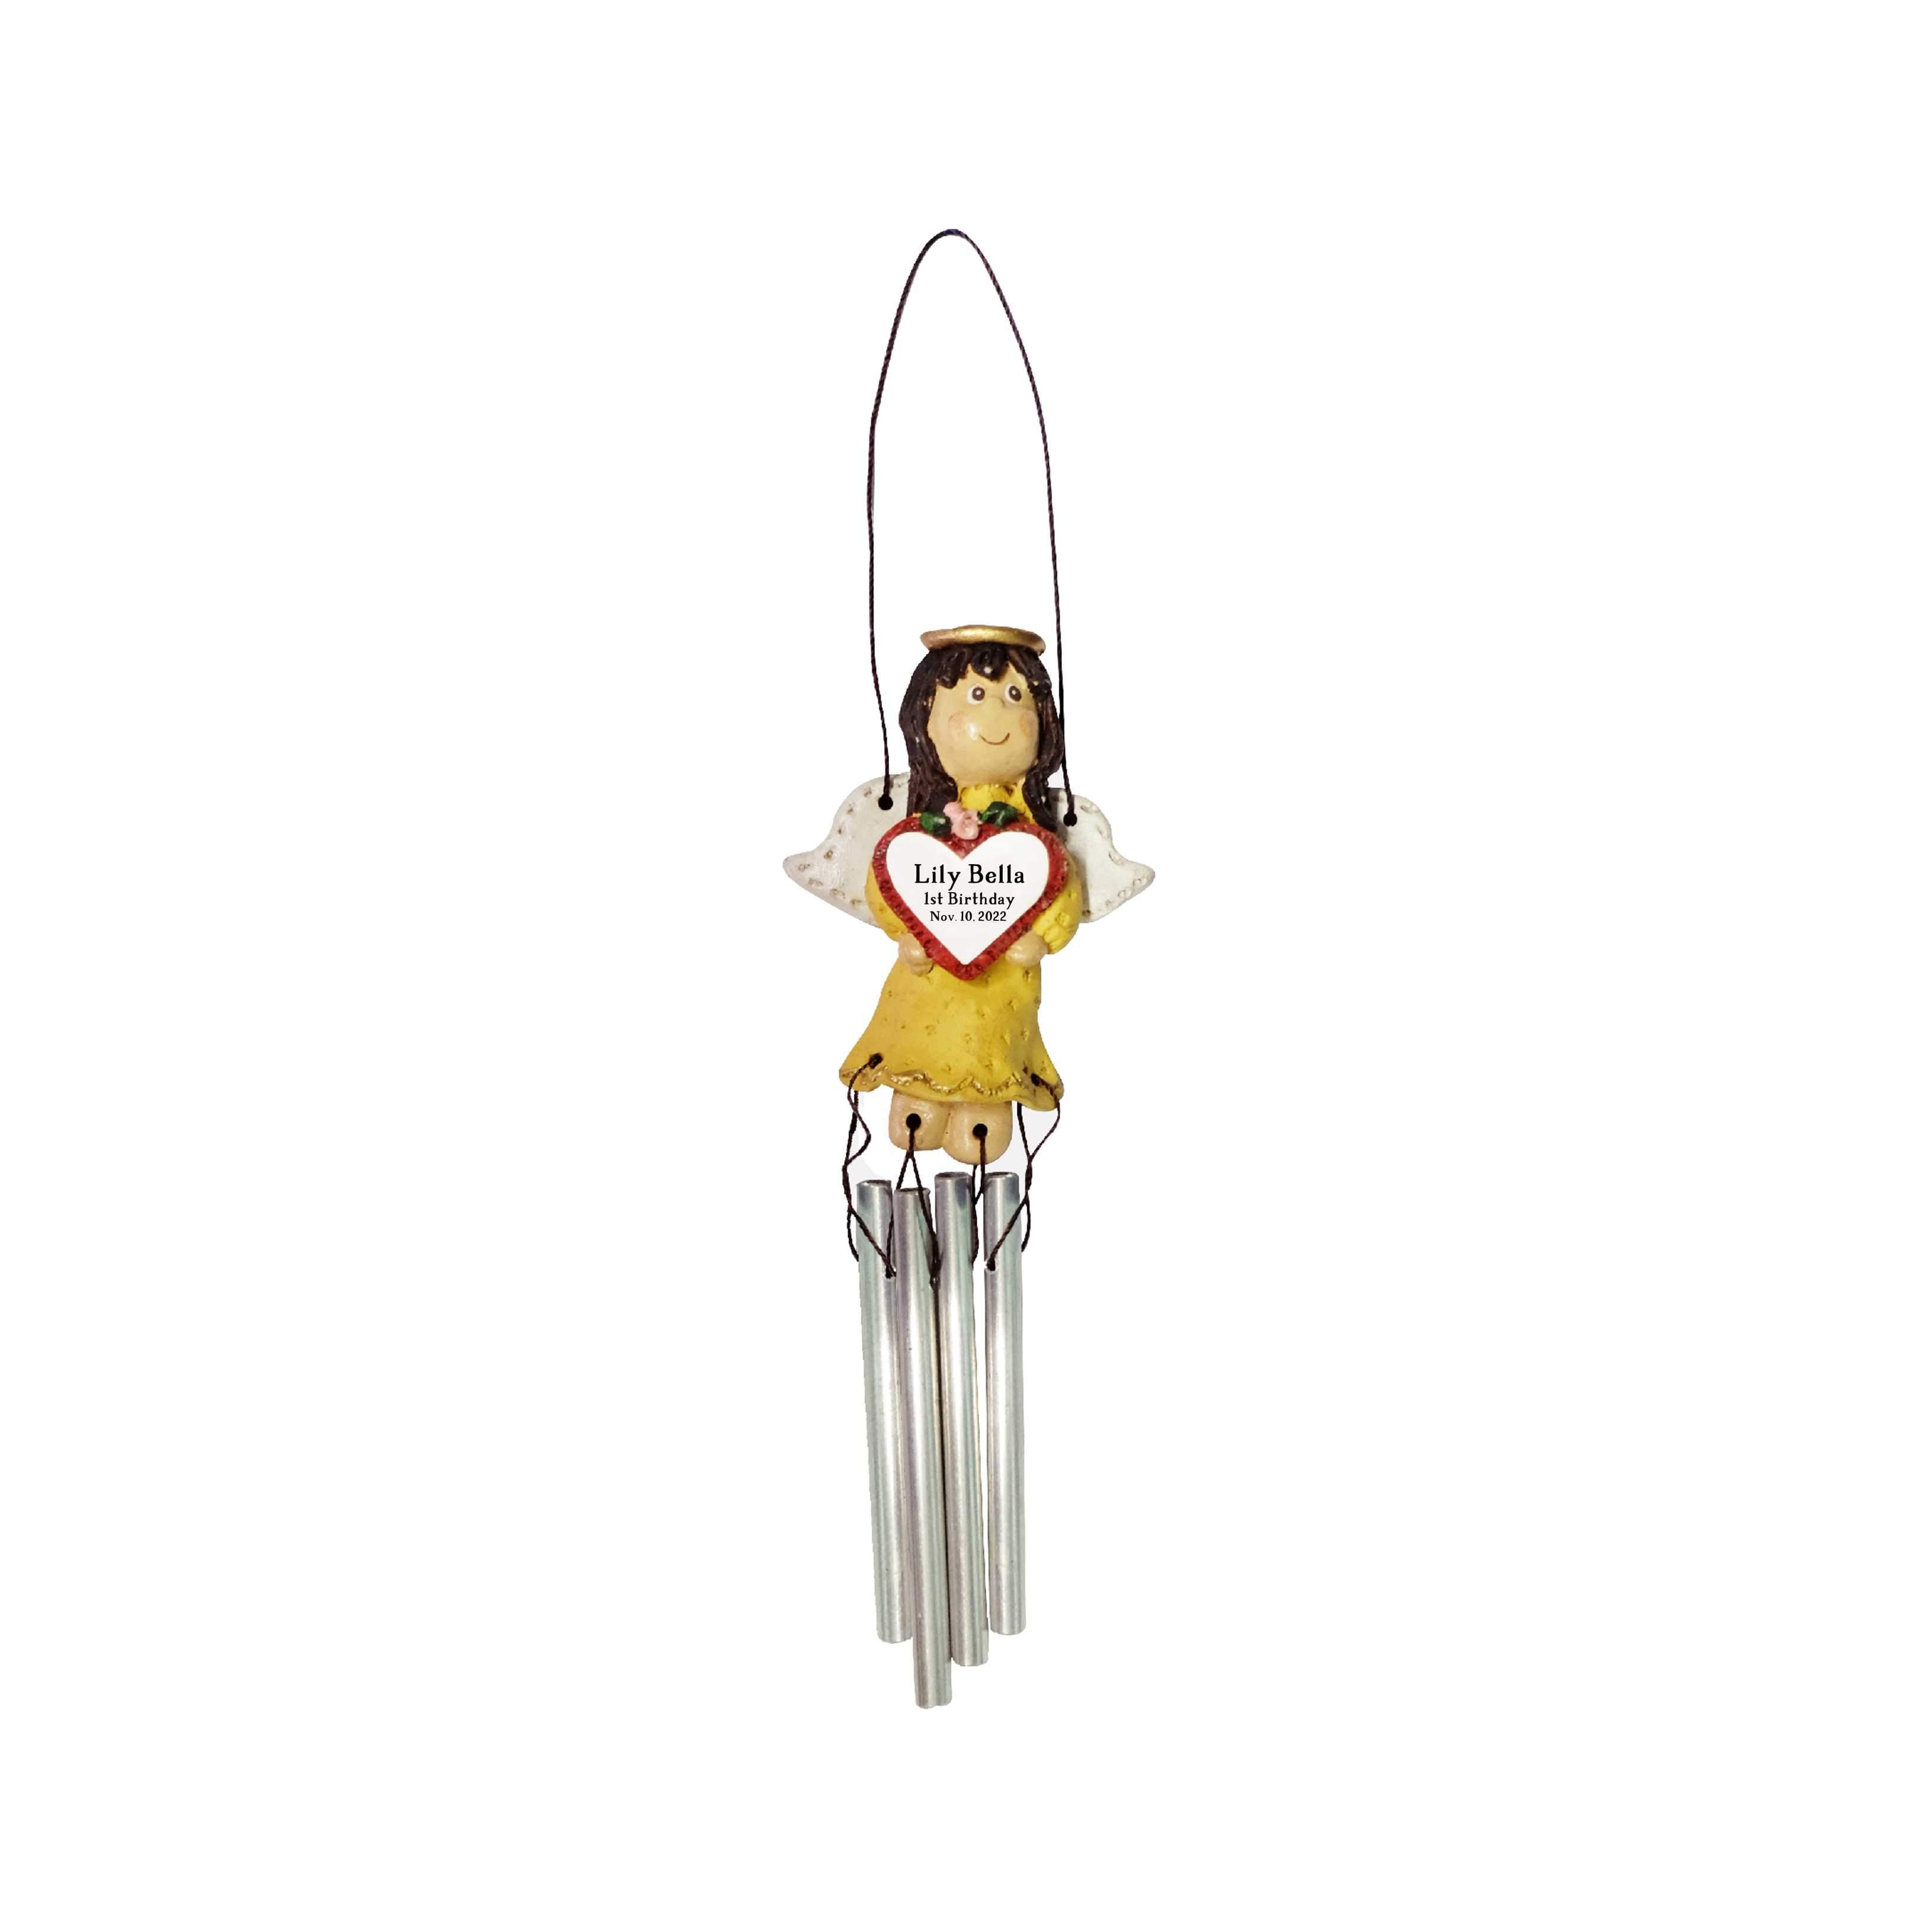 Standing Angel Personalized Chime